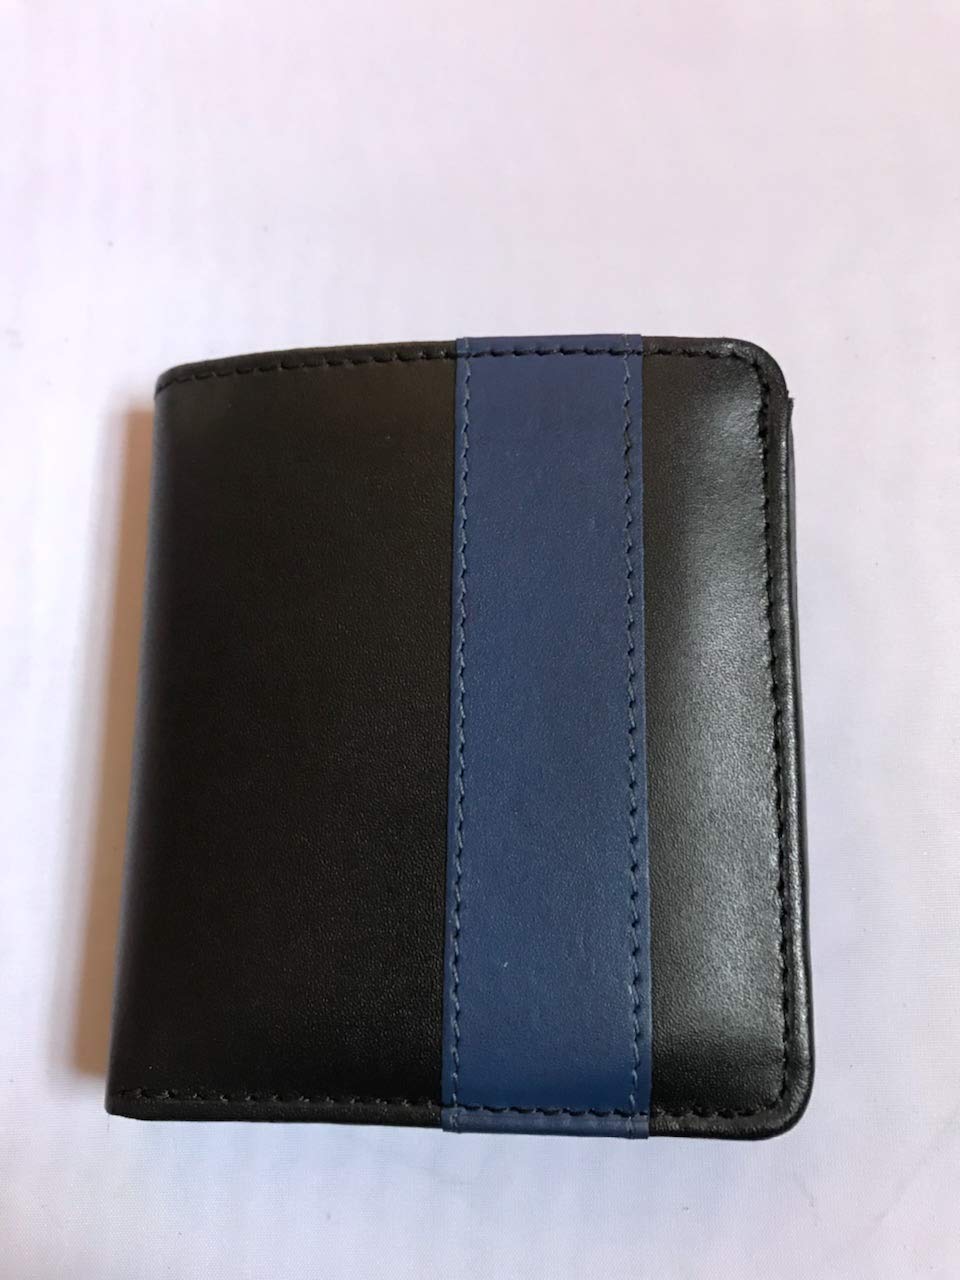 THIN BLUE LINE WALLET BADGE HOLDER FITS NYPD, CREDIT CARD ID, BILLFOLD AND PICTURES